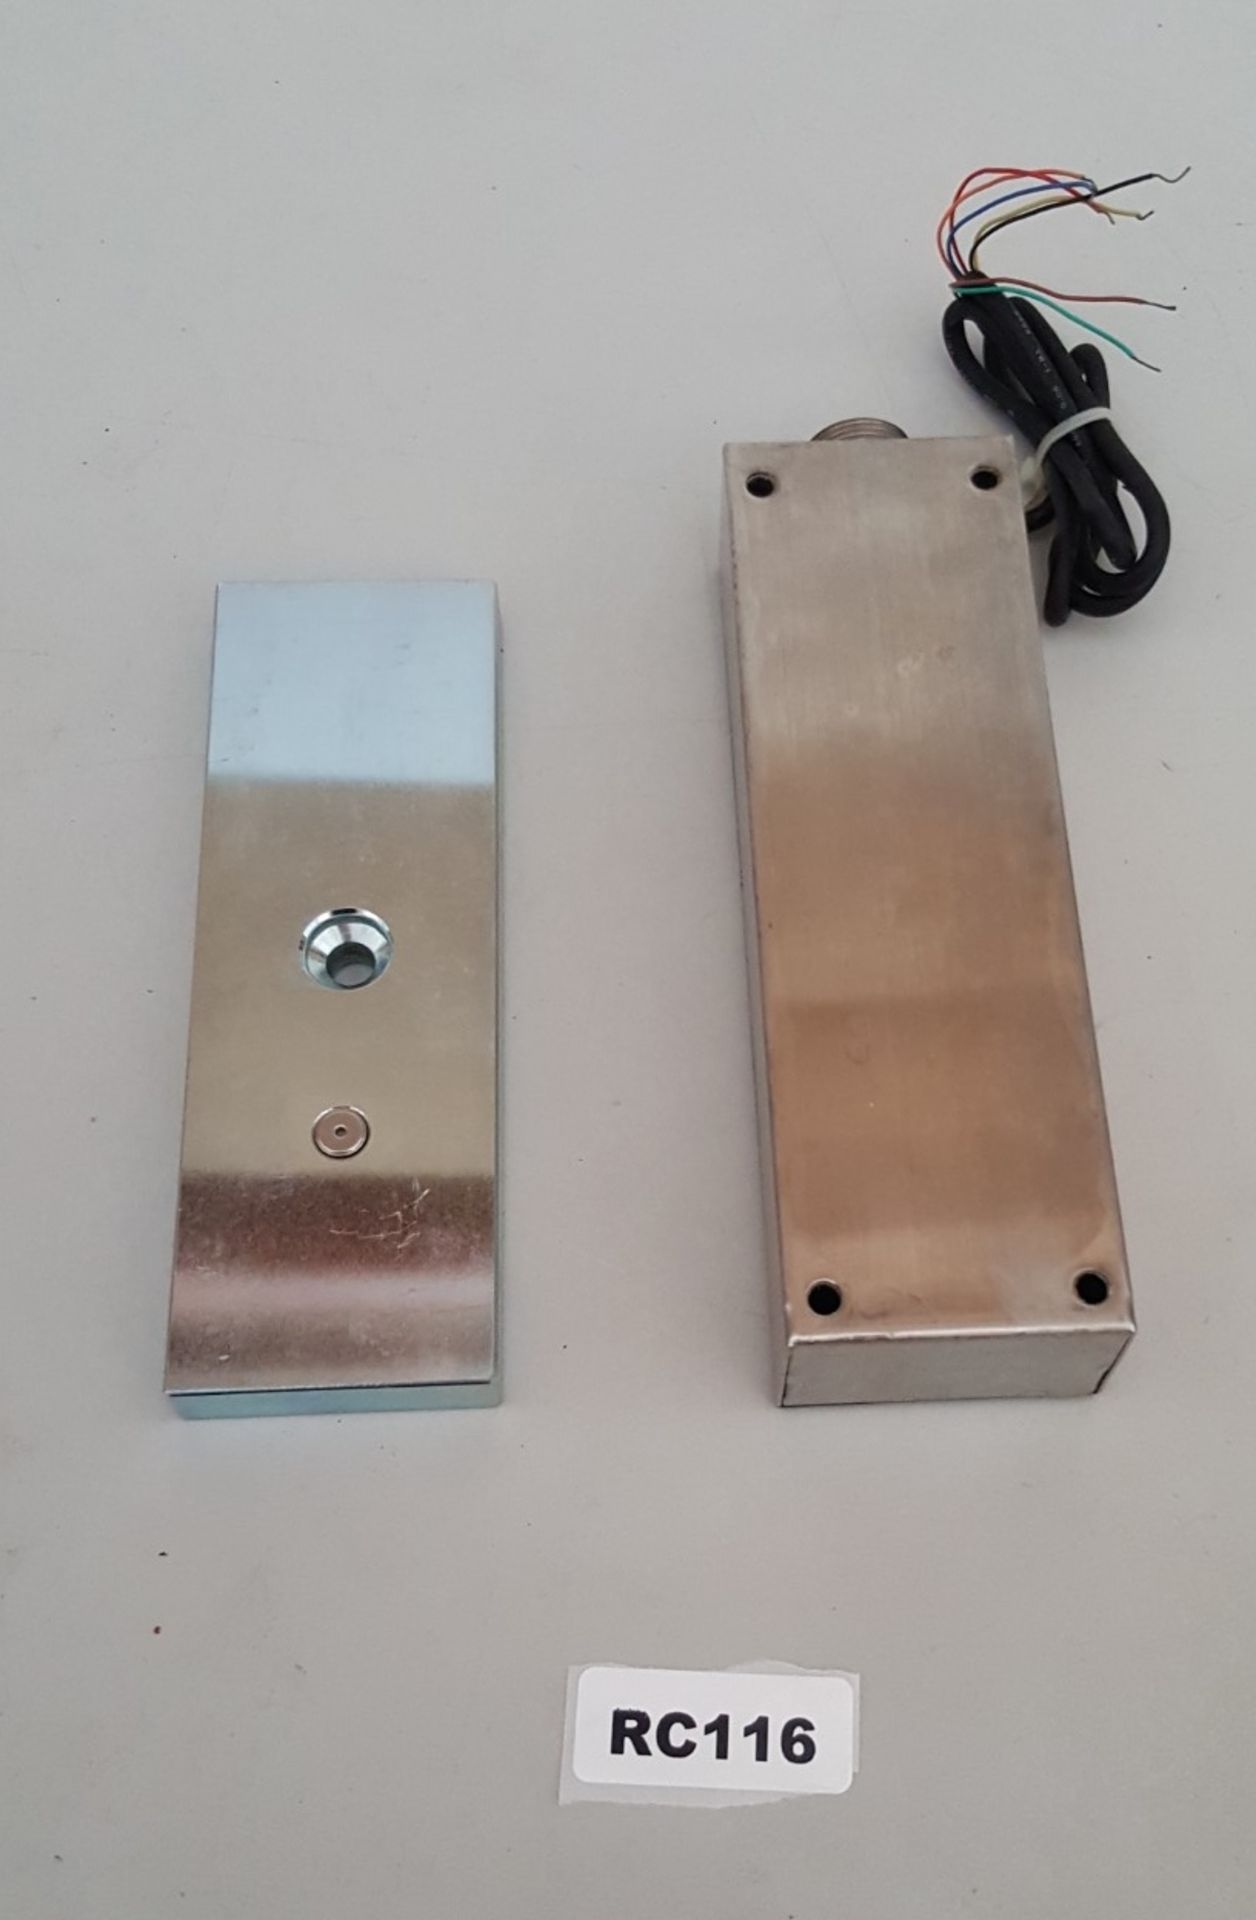 1 x Electromagnetic Outdoor Magnet lock ELS-1200-M - Ref RC116 - CL011 - Location: Altrincham WA14 <